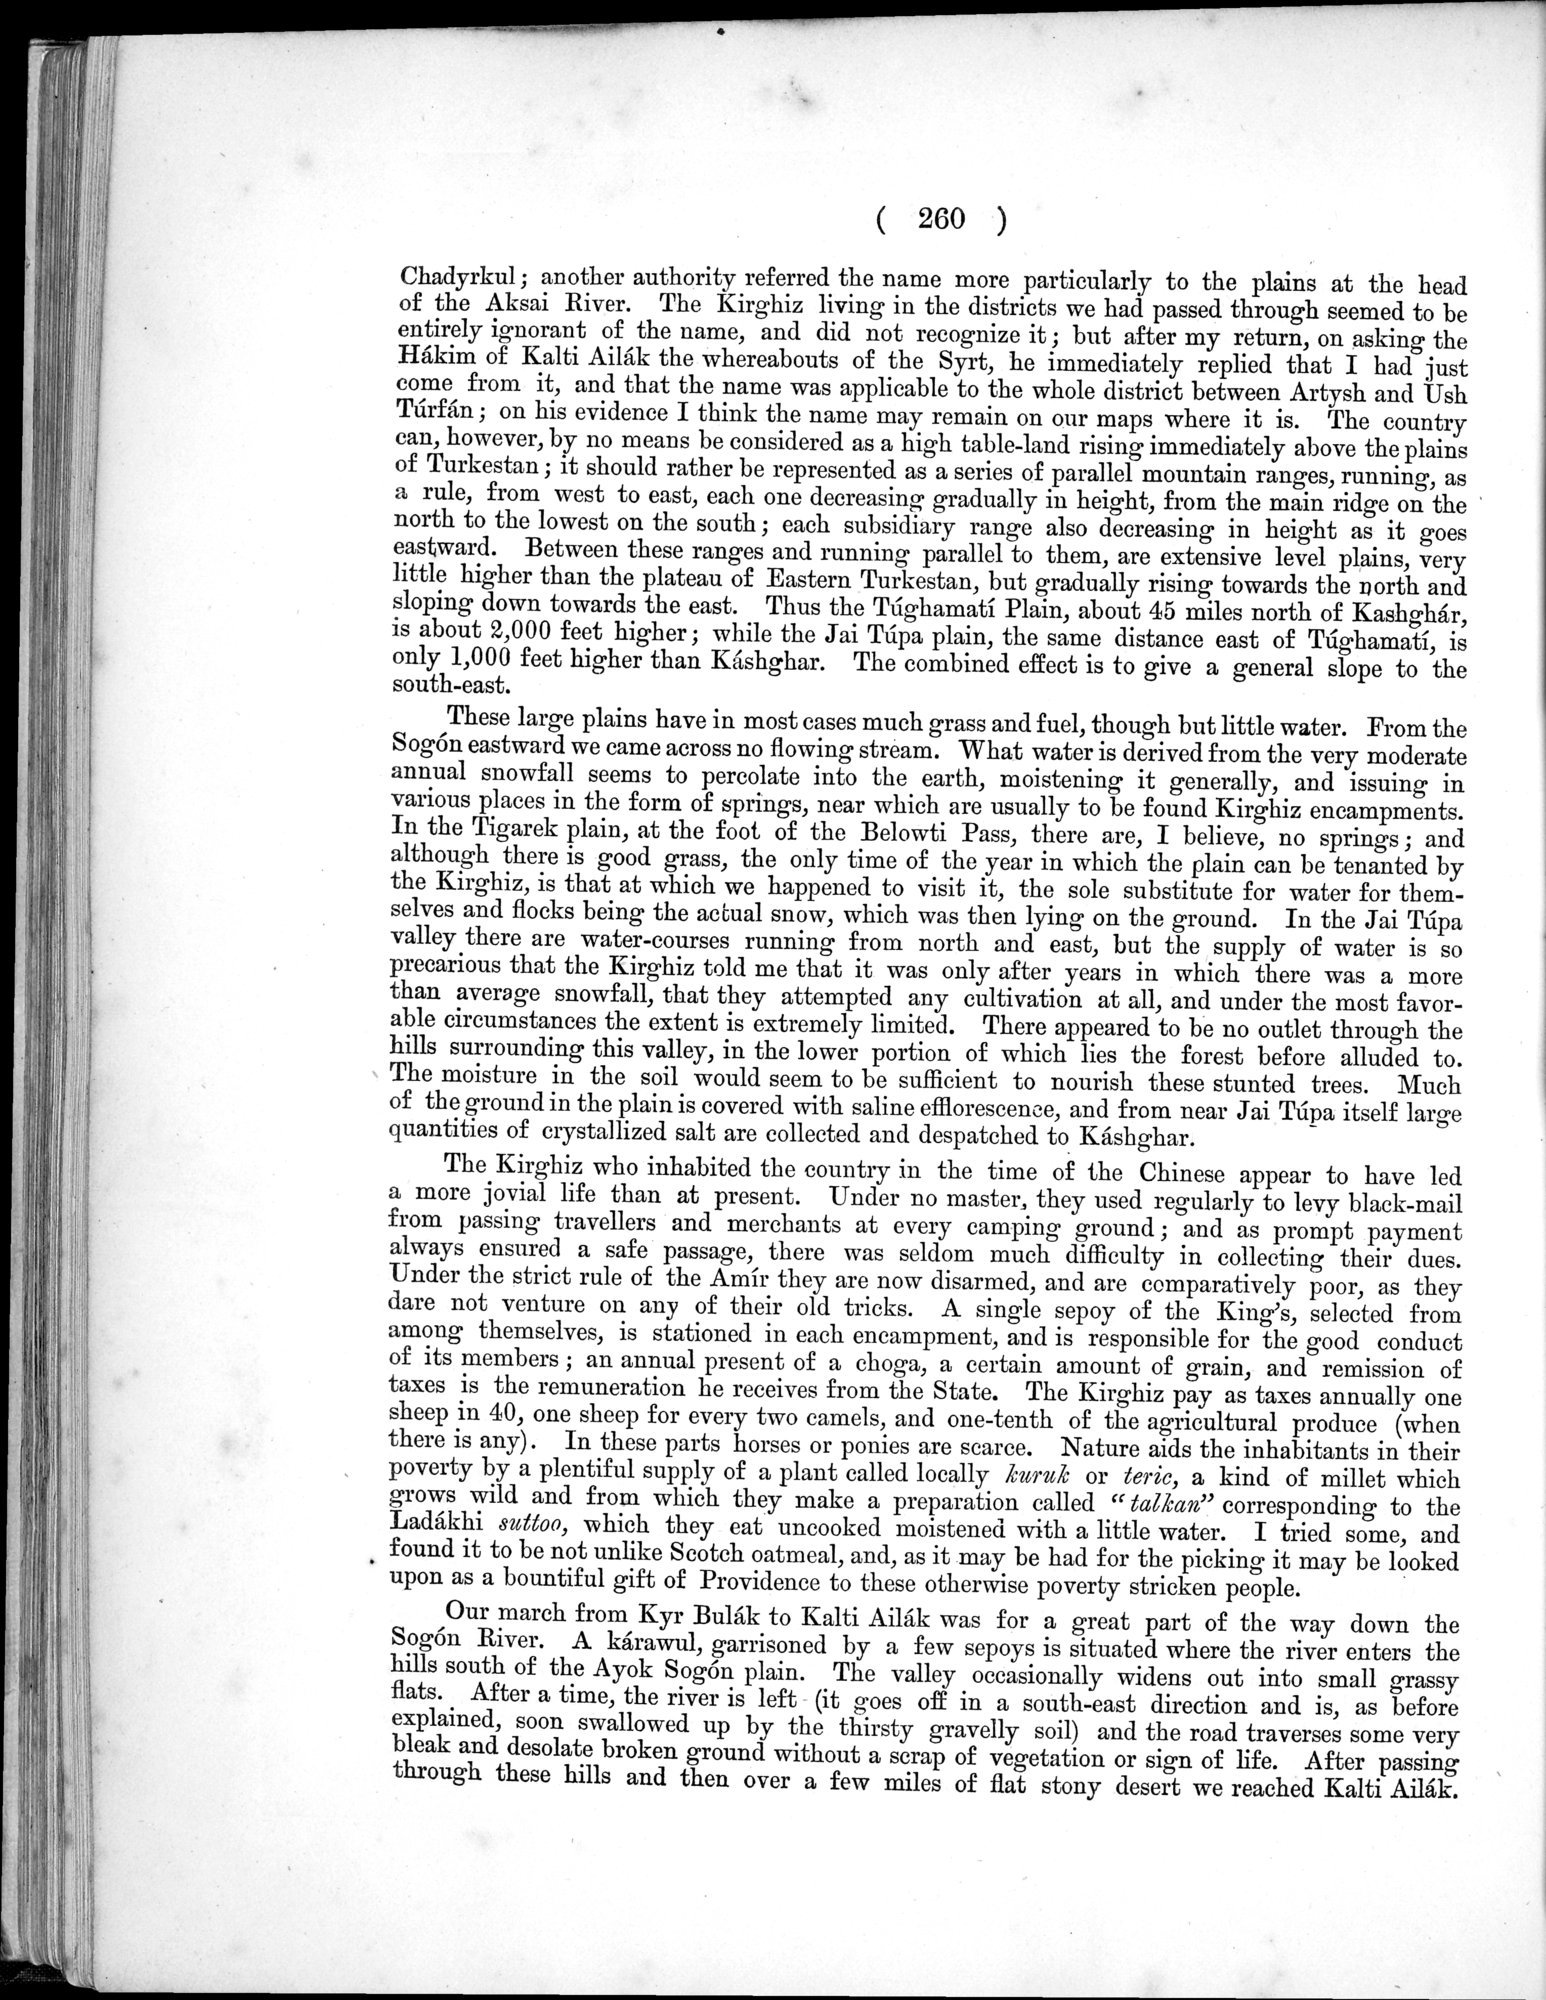 Report of a Mission to Yarkund in 1873 : vol.1 / Page 374 (Grayscale High Resolution Image)